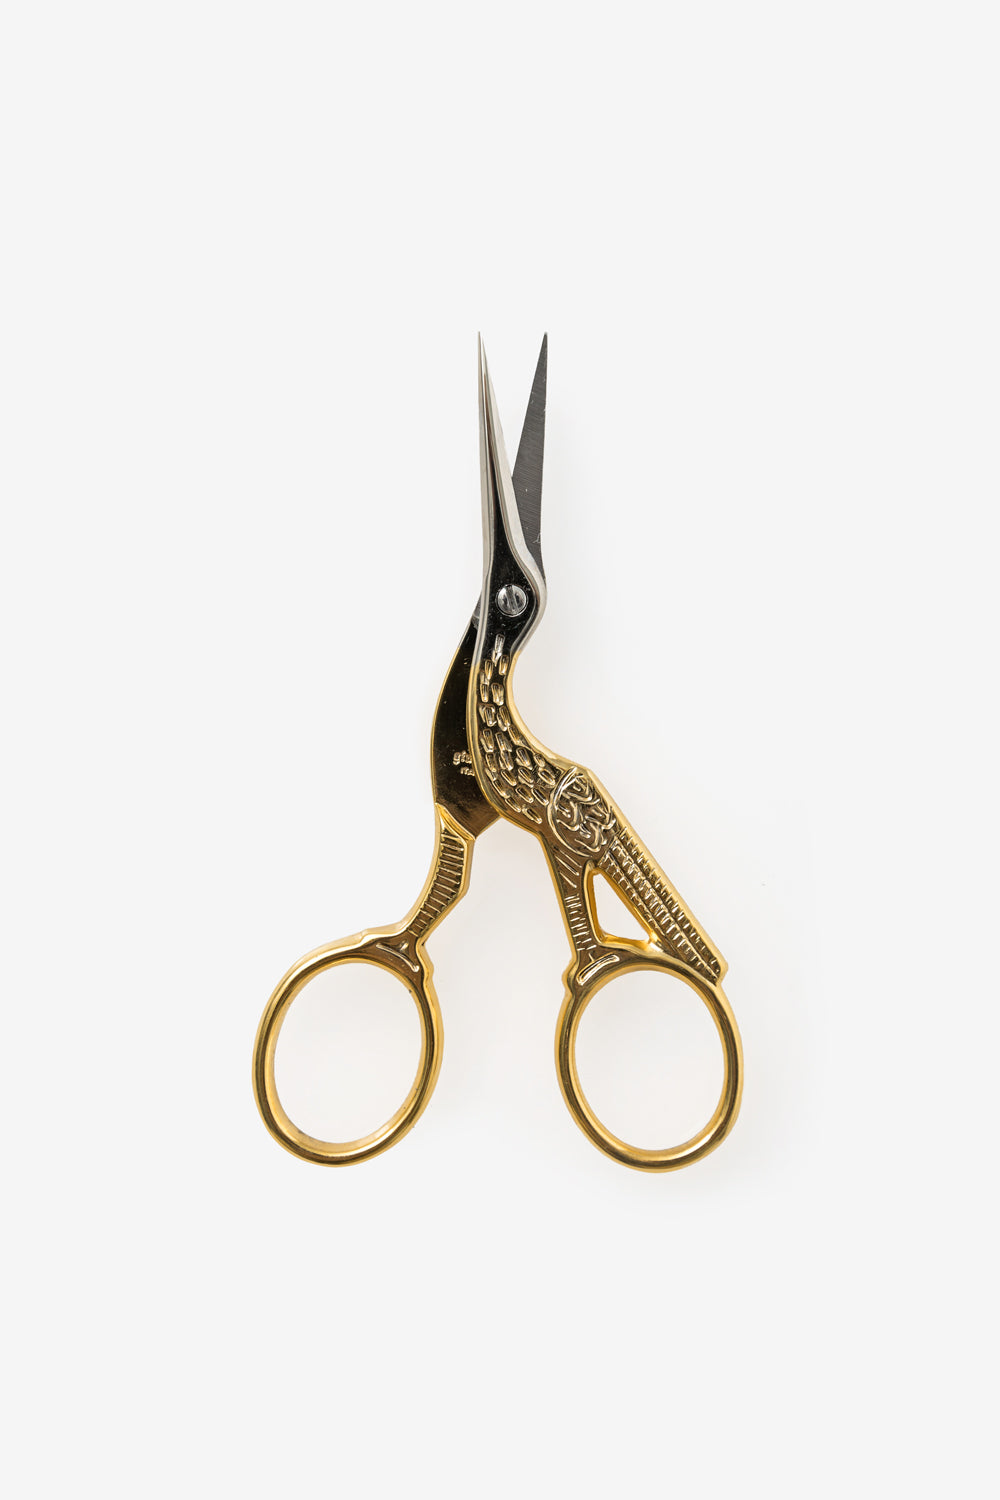 Gingher Embroidery Scissors